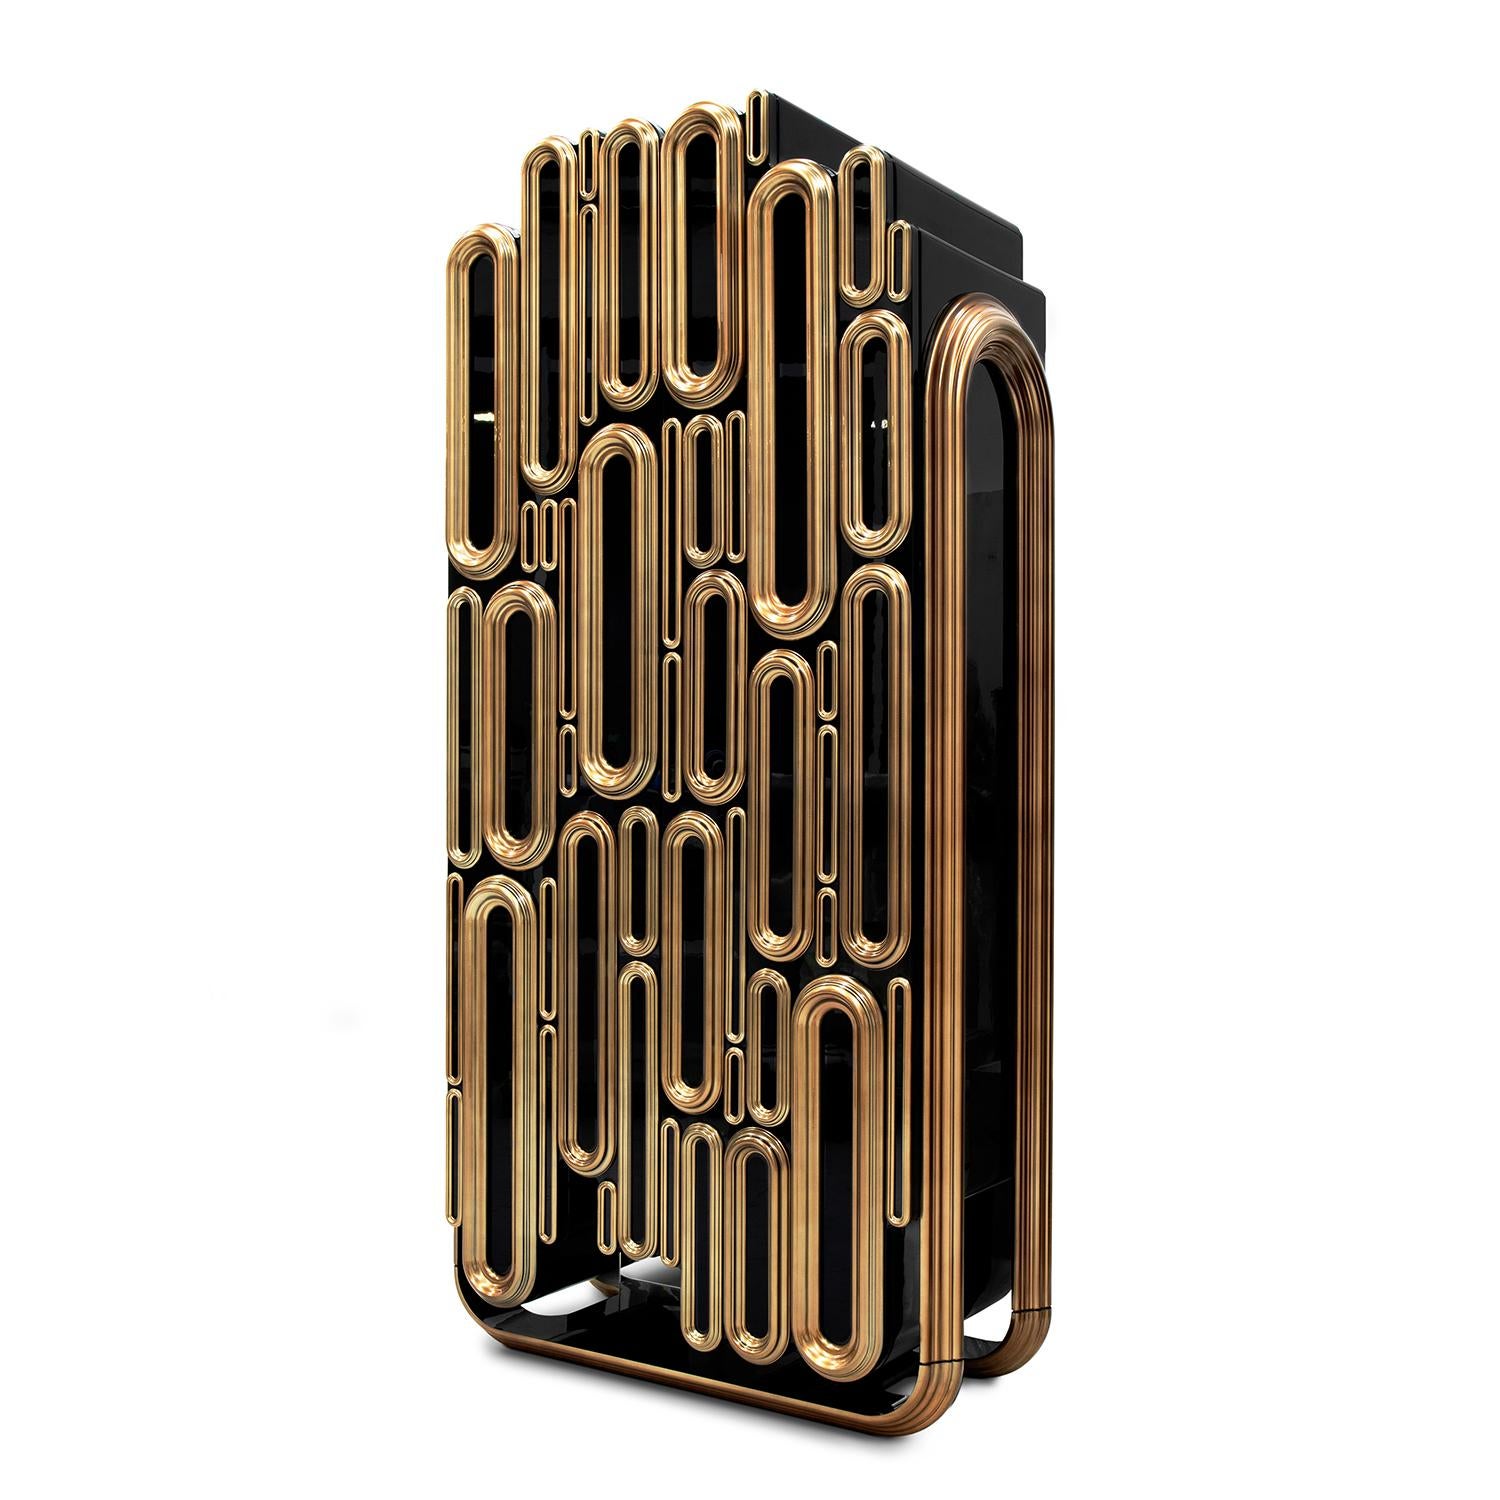 Cabinet blocks gold with wooden structure. Each part
covered by metallic elements in gold finish. Handcrafted in
black and gold high gloss varnish finish. Mirror inside.
Joinery, lacquering, varnishing techniques.
Exceptional piece.